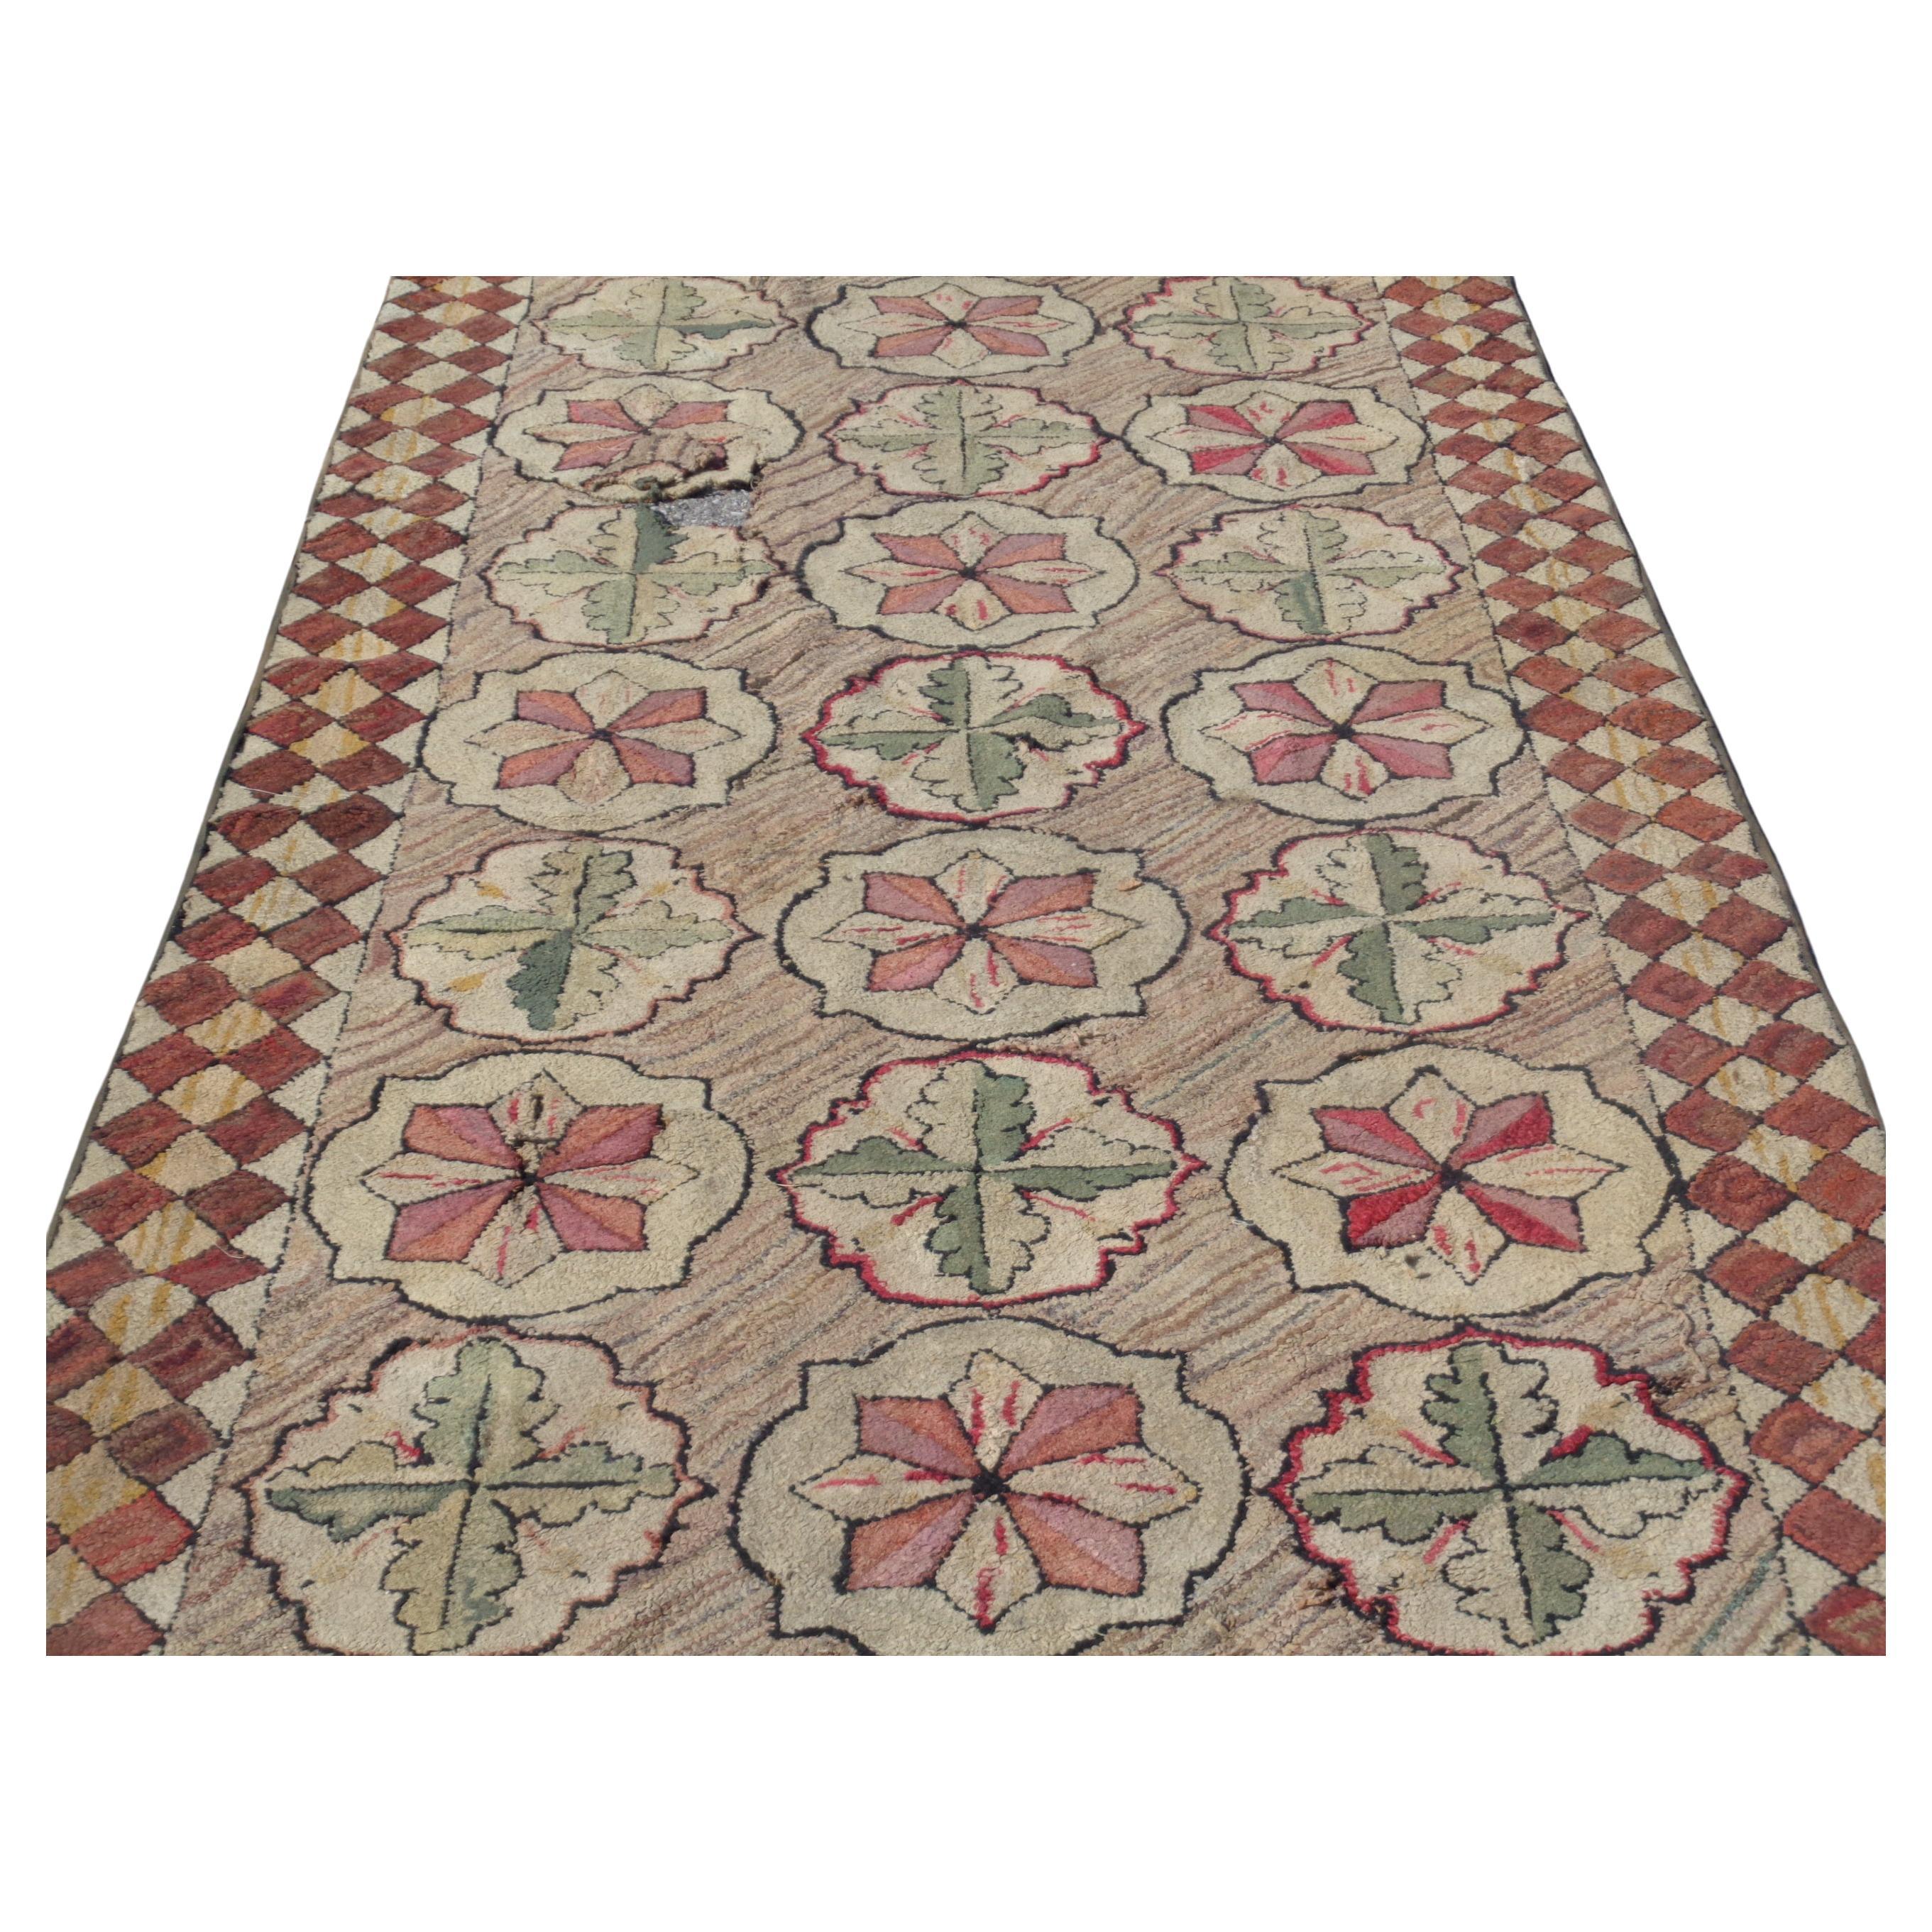 Hand-Woven Antique American Hand Woven Hooked Rug Long Runner, Circa 1880-1900 For Sale